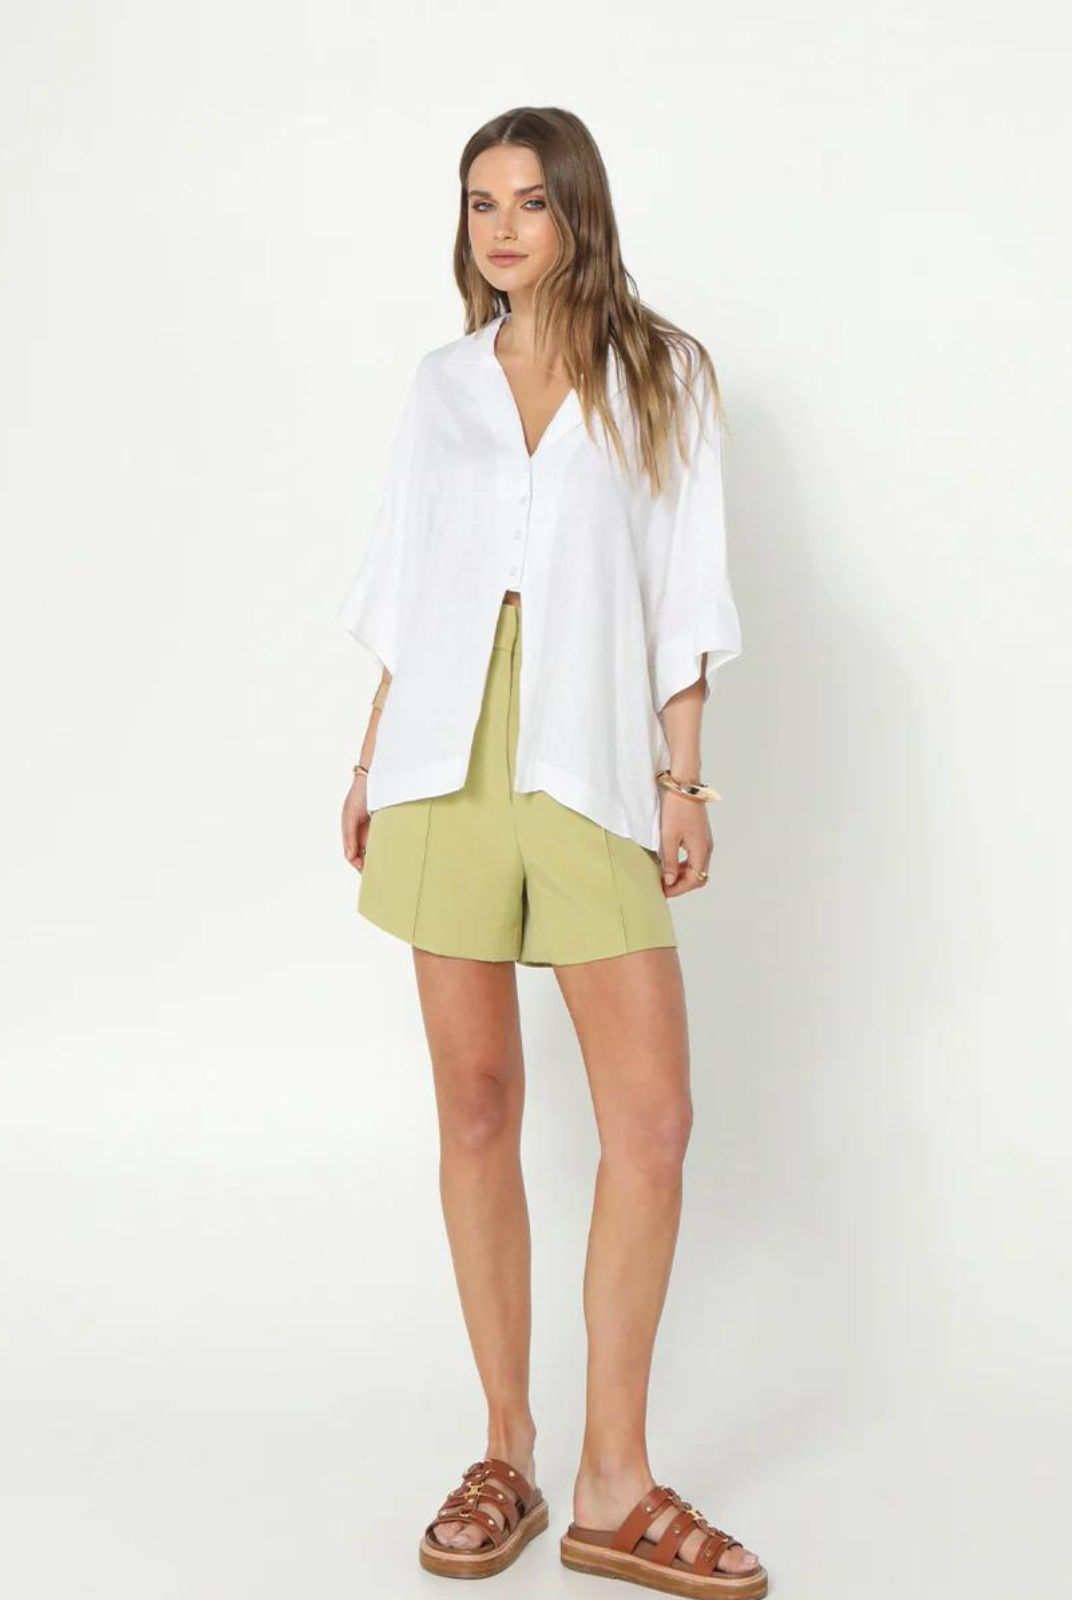 Madison The Label Irena Shirt. White relaxed fit linen shirt.